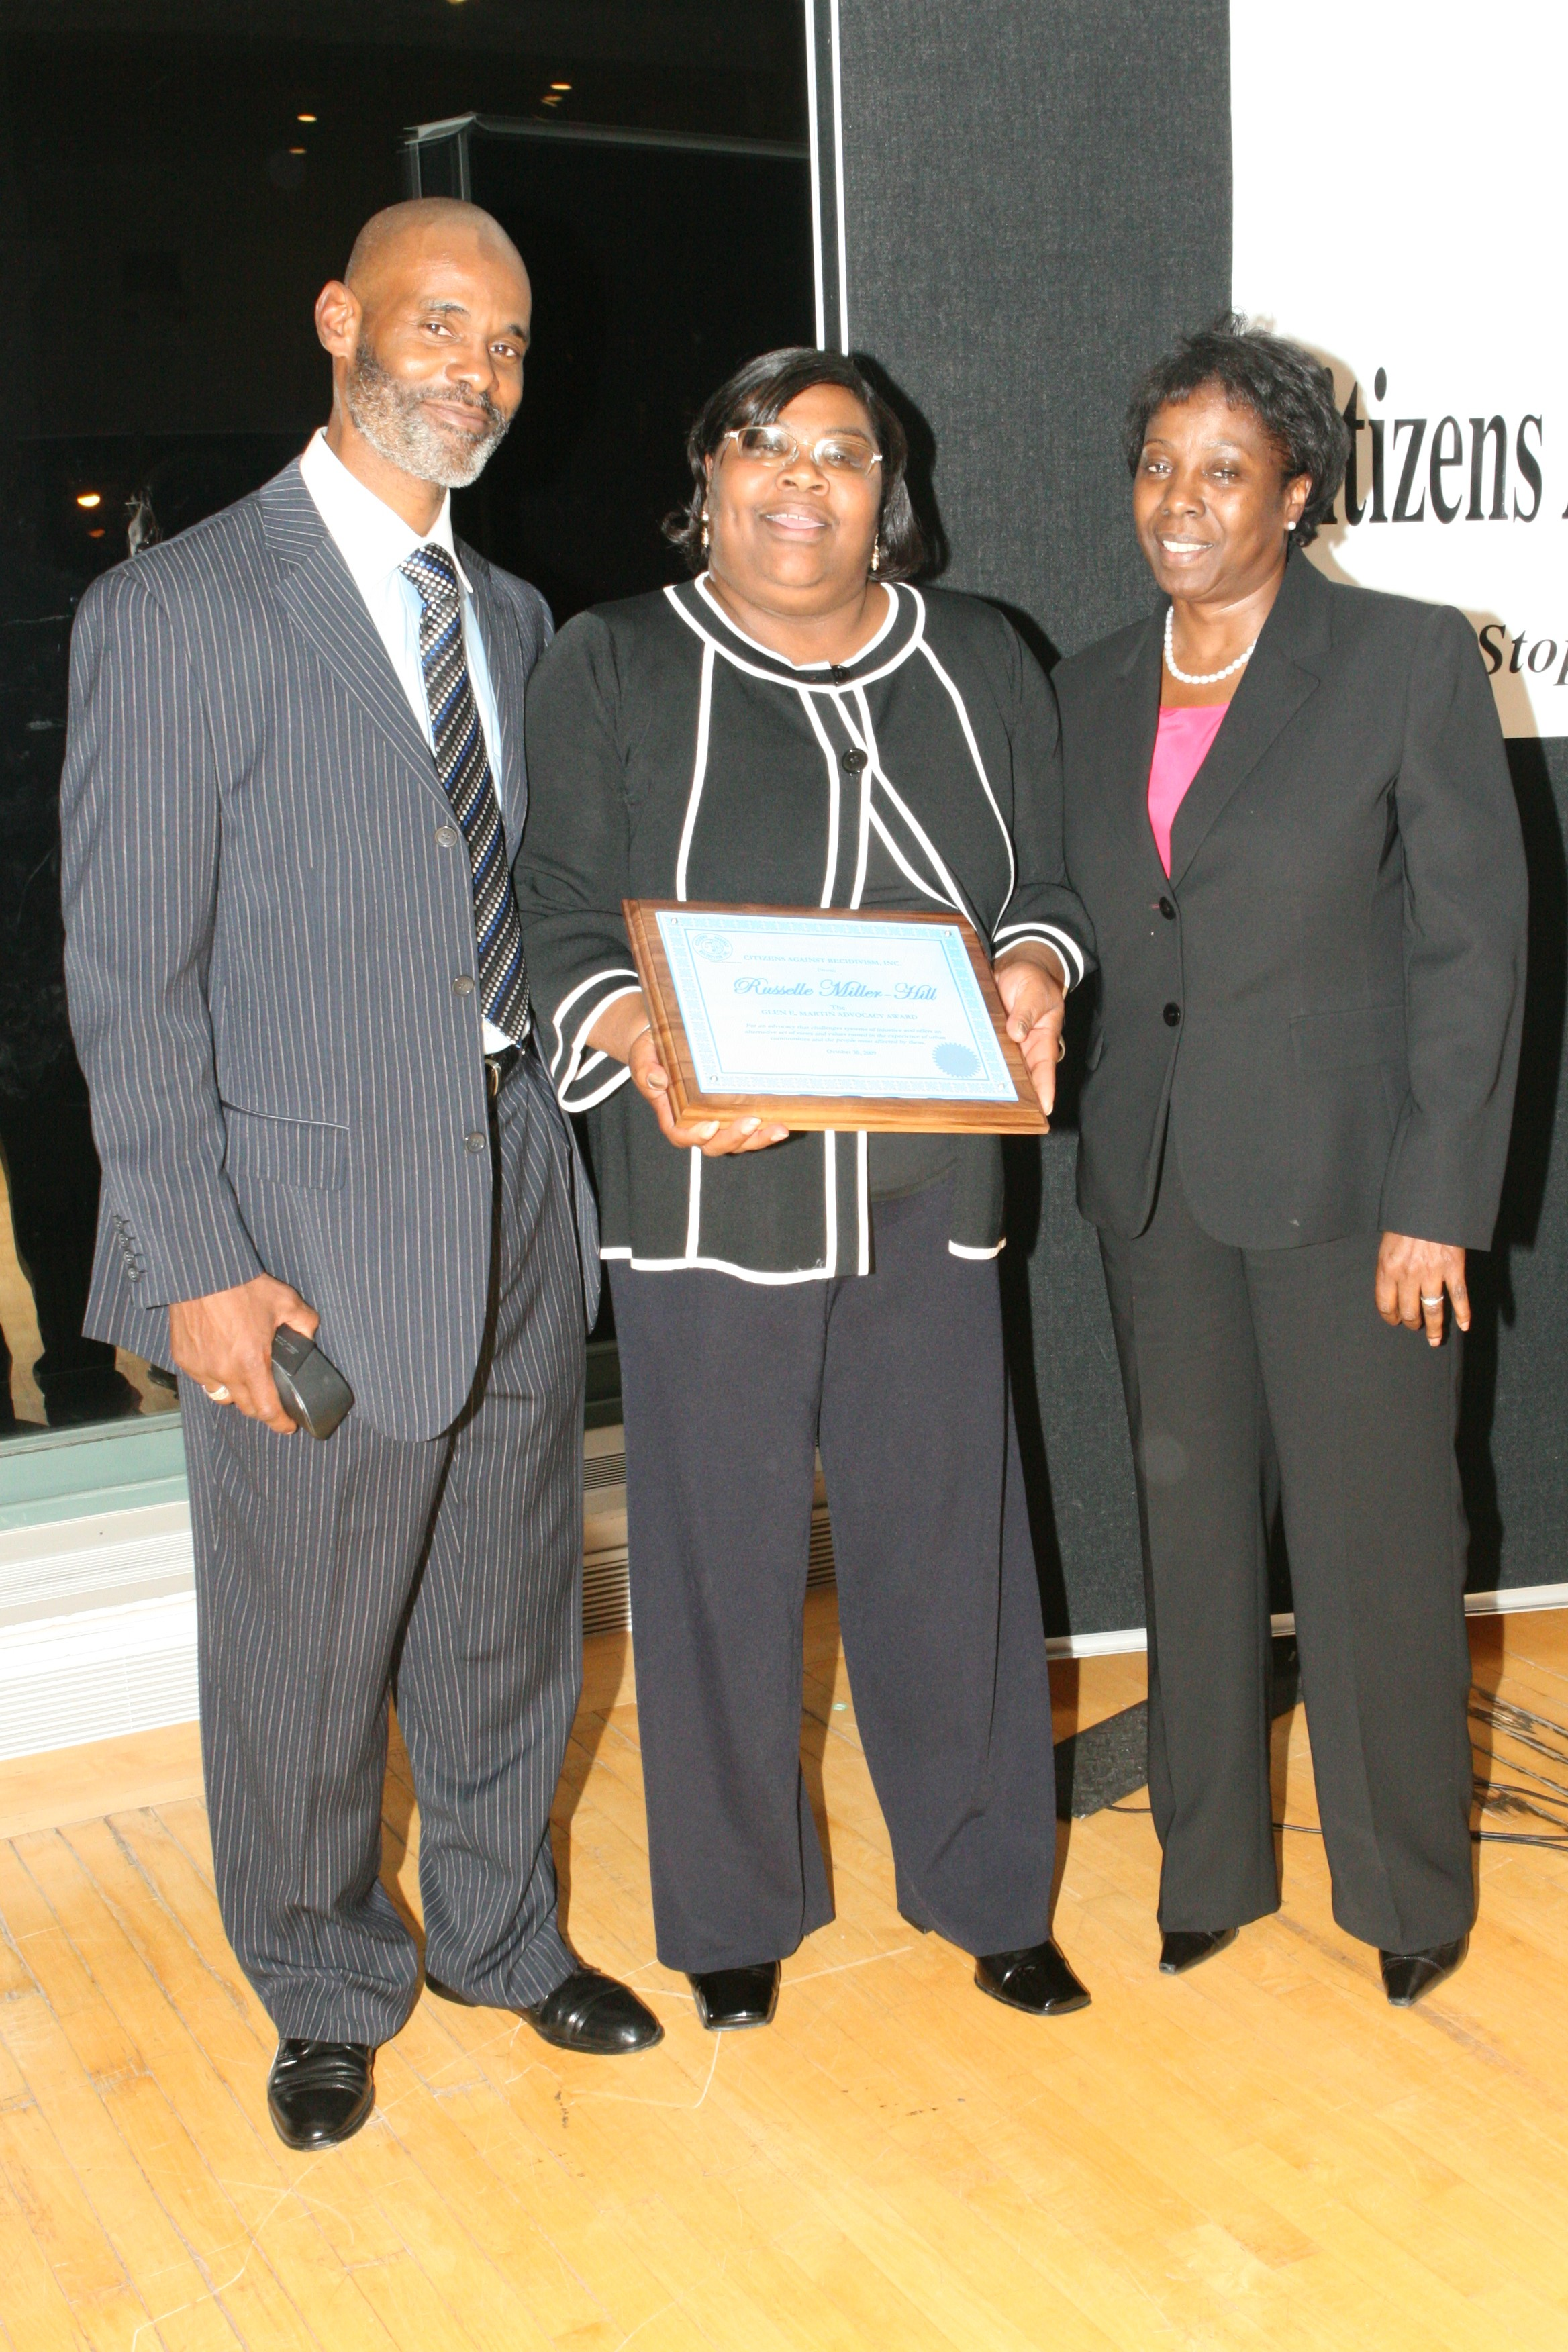 Rusti earning the Citizens Against Recidivism award in 2012